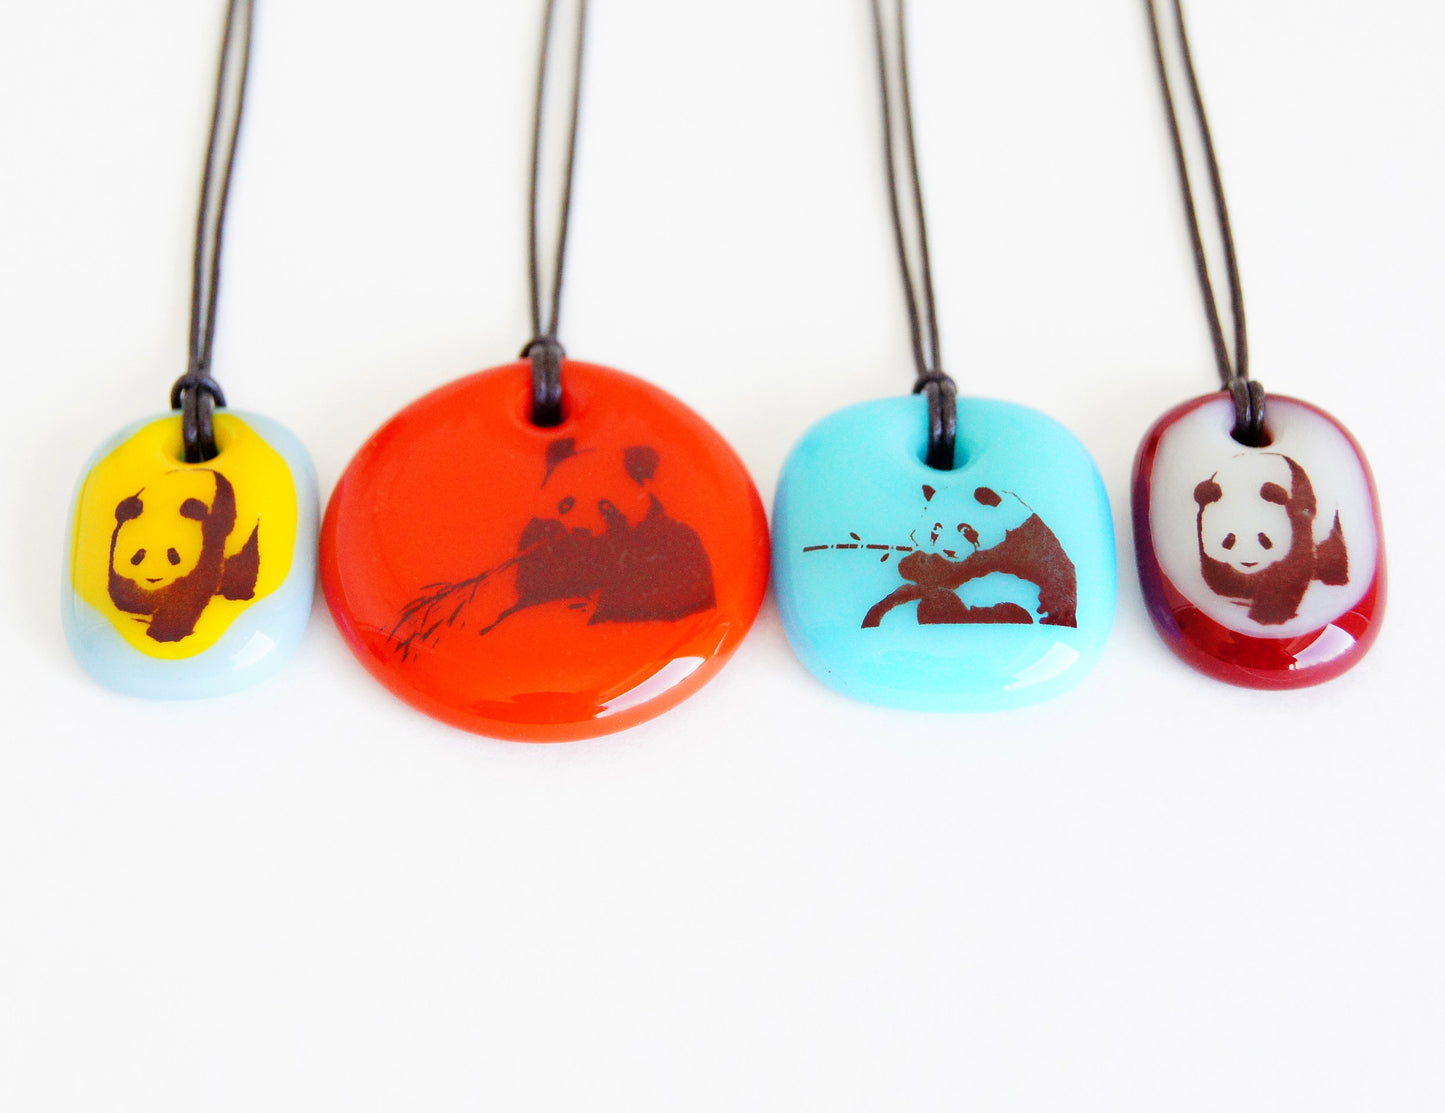 Limited batch of colourful glass panda necklaces